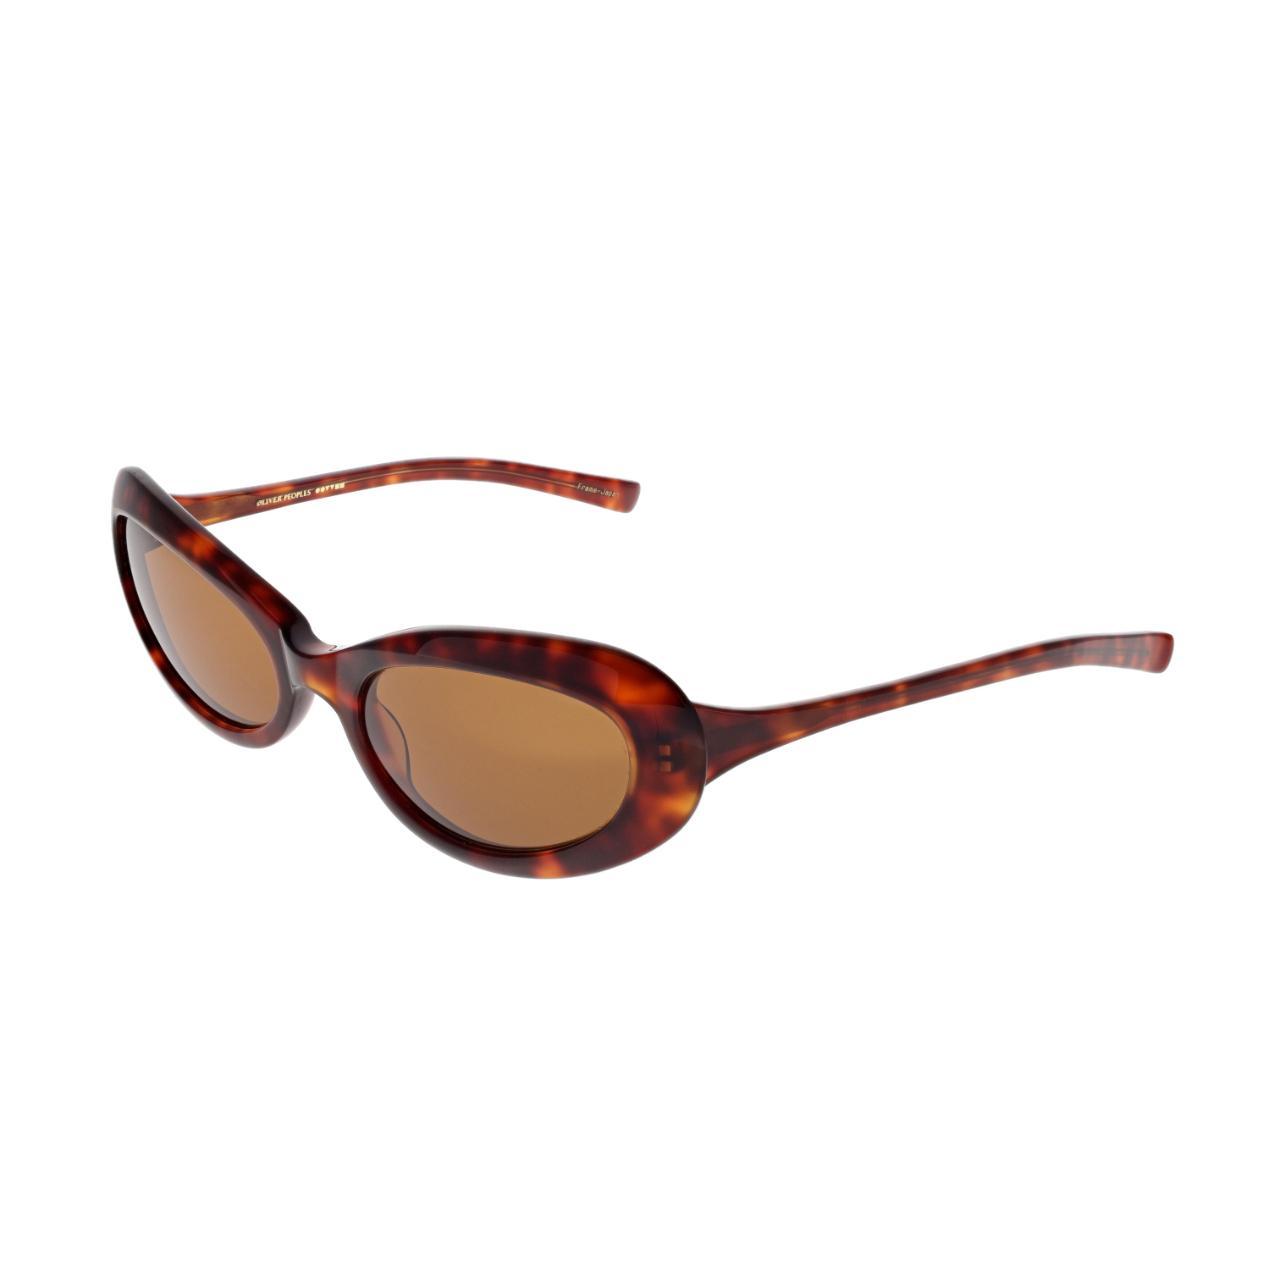 Product Image 1 - OLIVER PEOPLES RIVIERA SUNGLASSES

Oliver Peoples